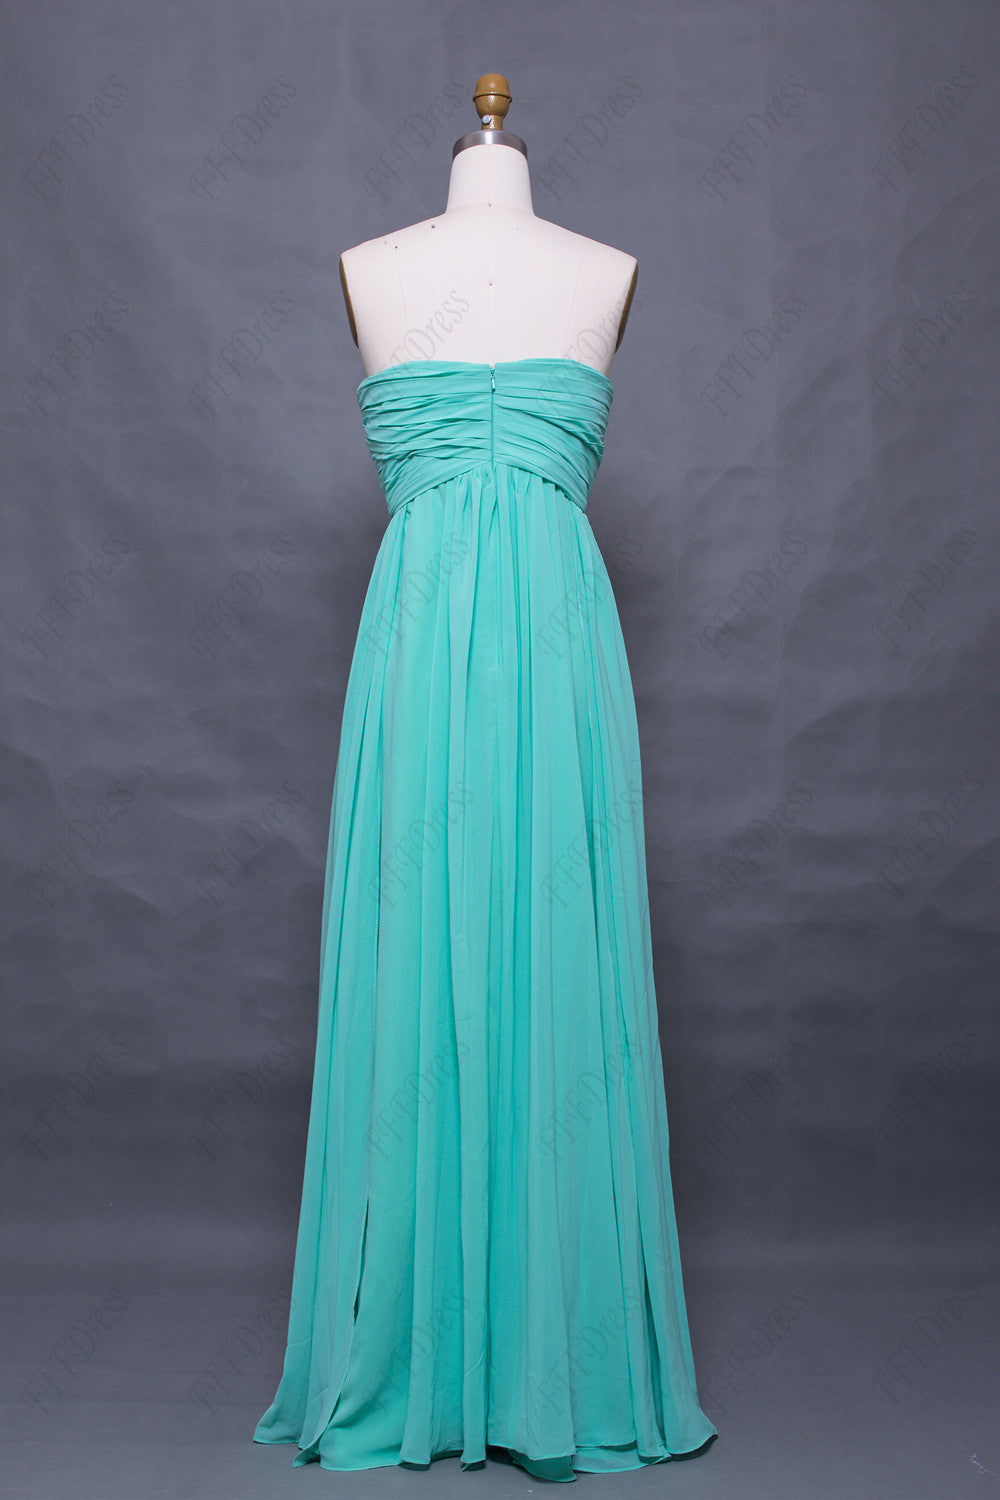 Sweetheart mint bridesmaid dresses for spring and summer wedding